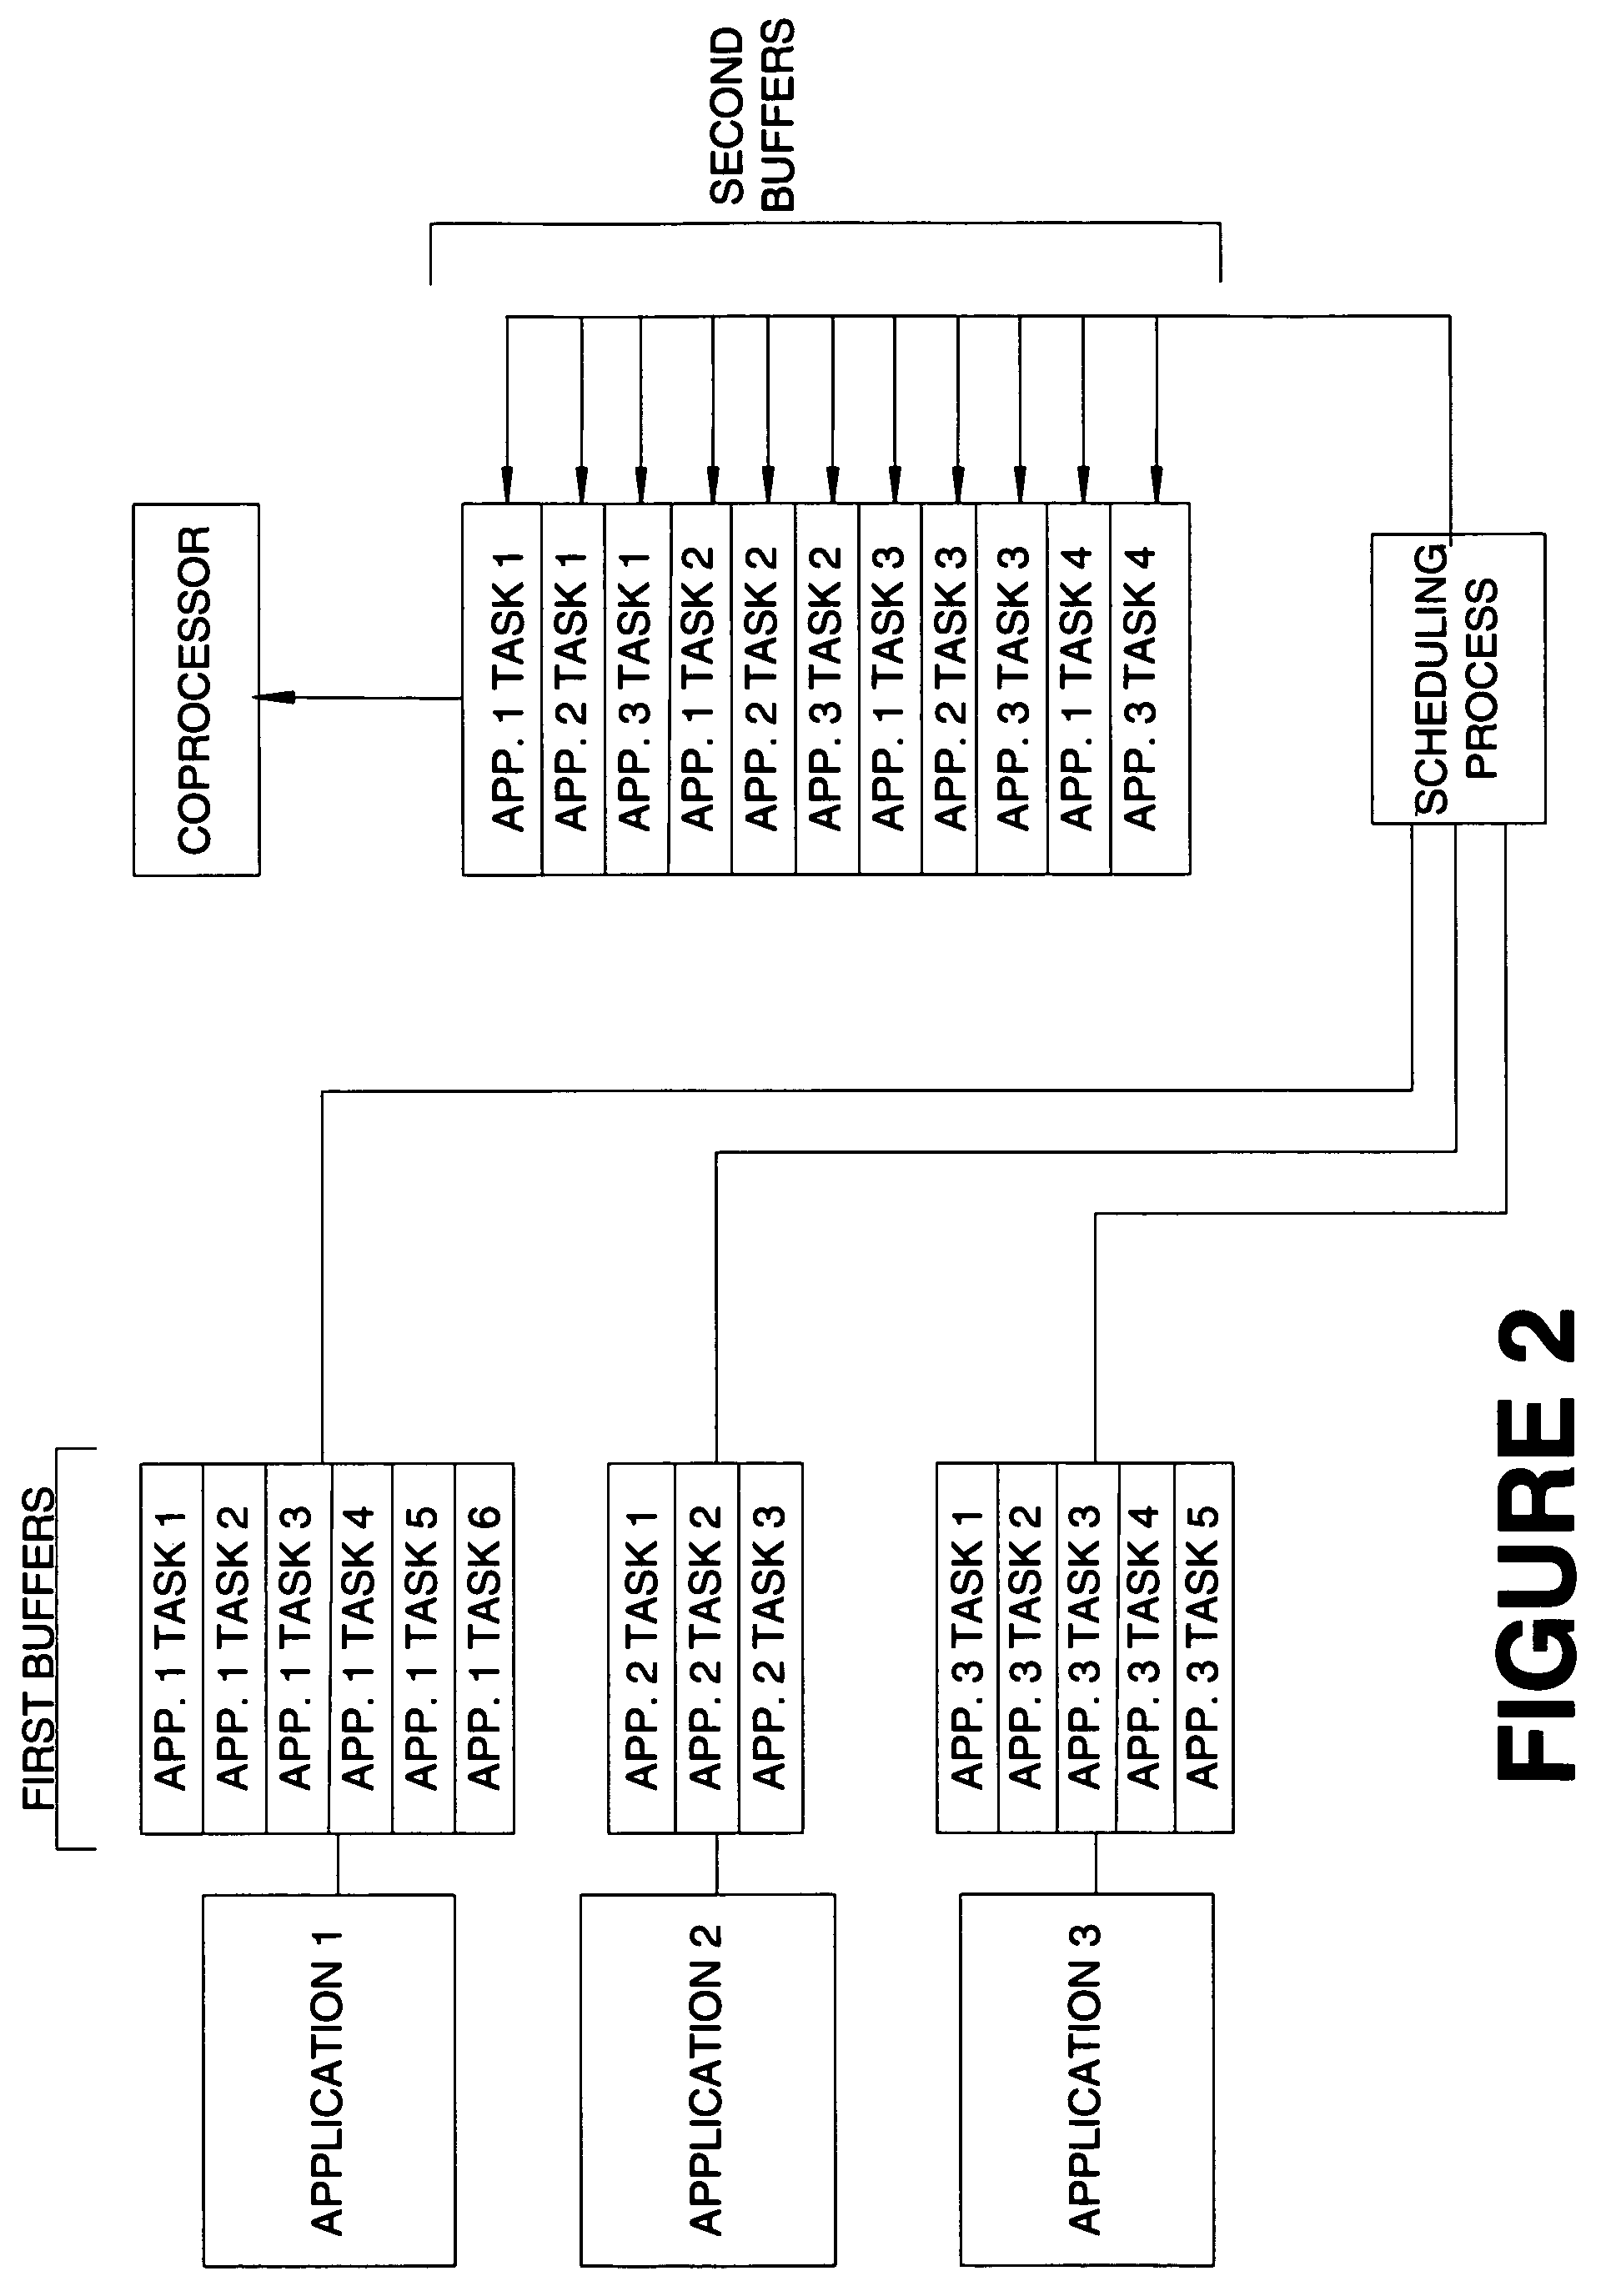 Multithreaded kernel for graphics processing unit